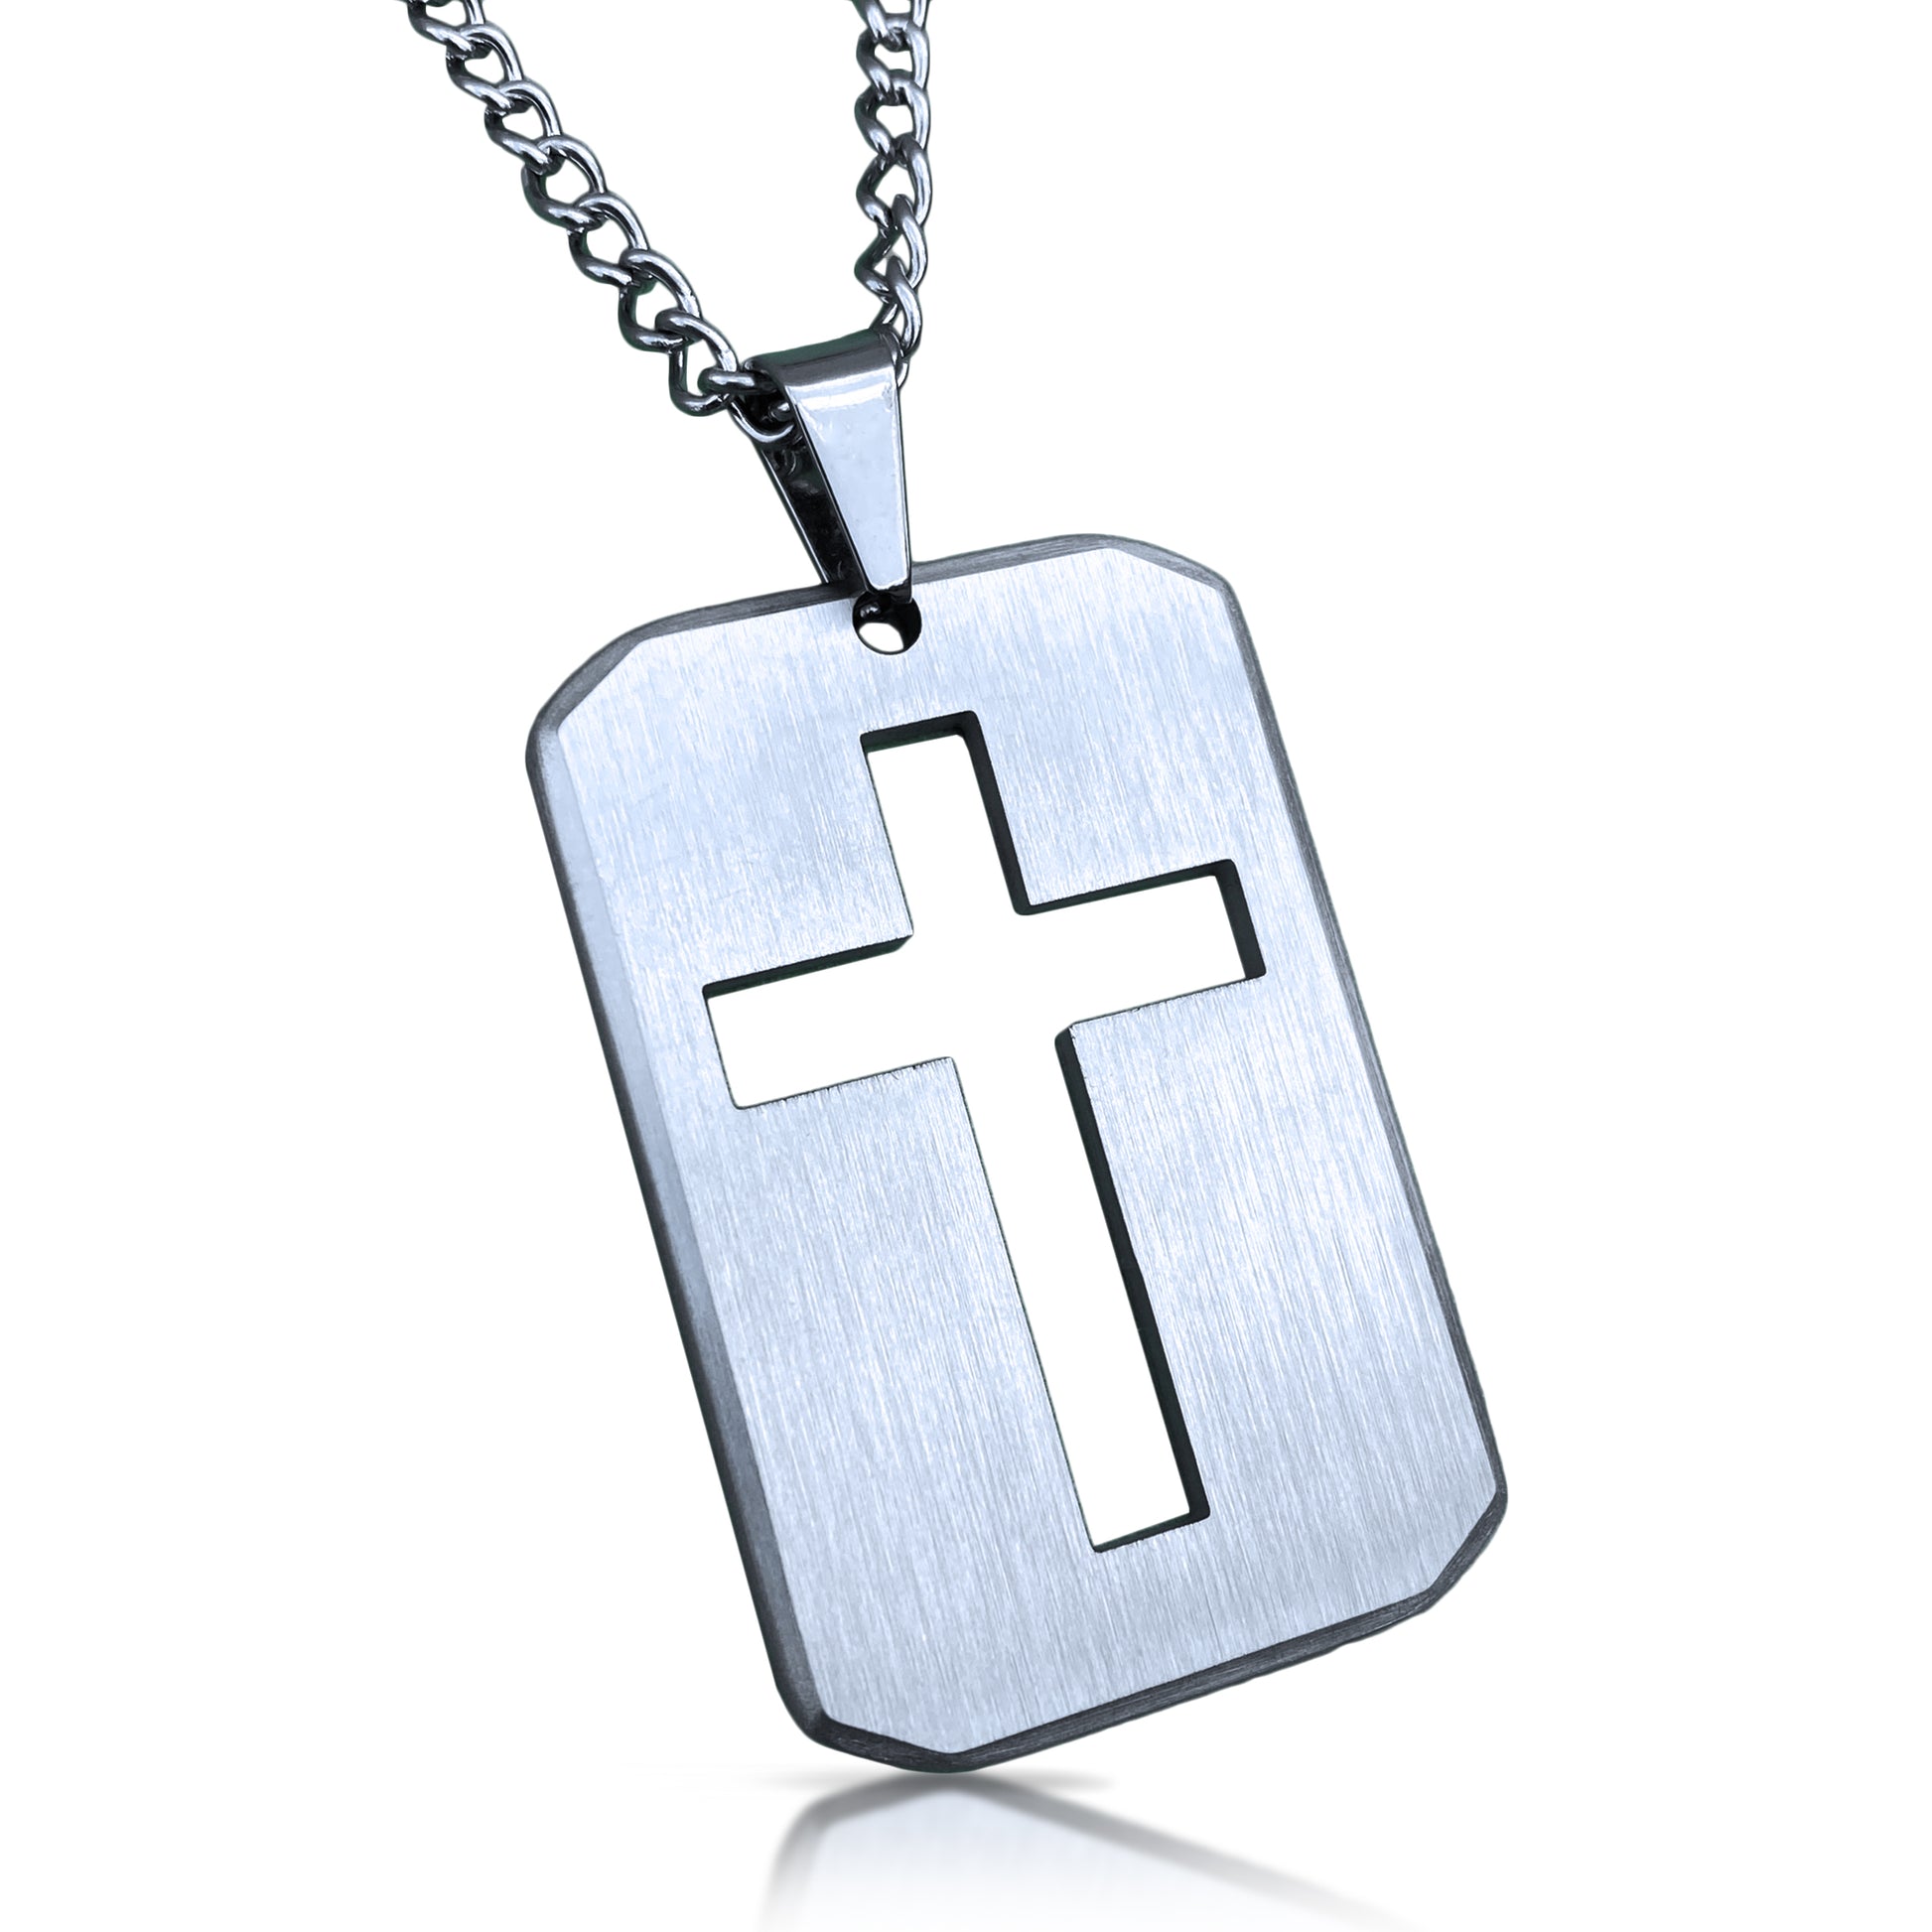 Cross Cut Out Pendant With Chain Necklace - Stainless Steel